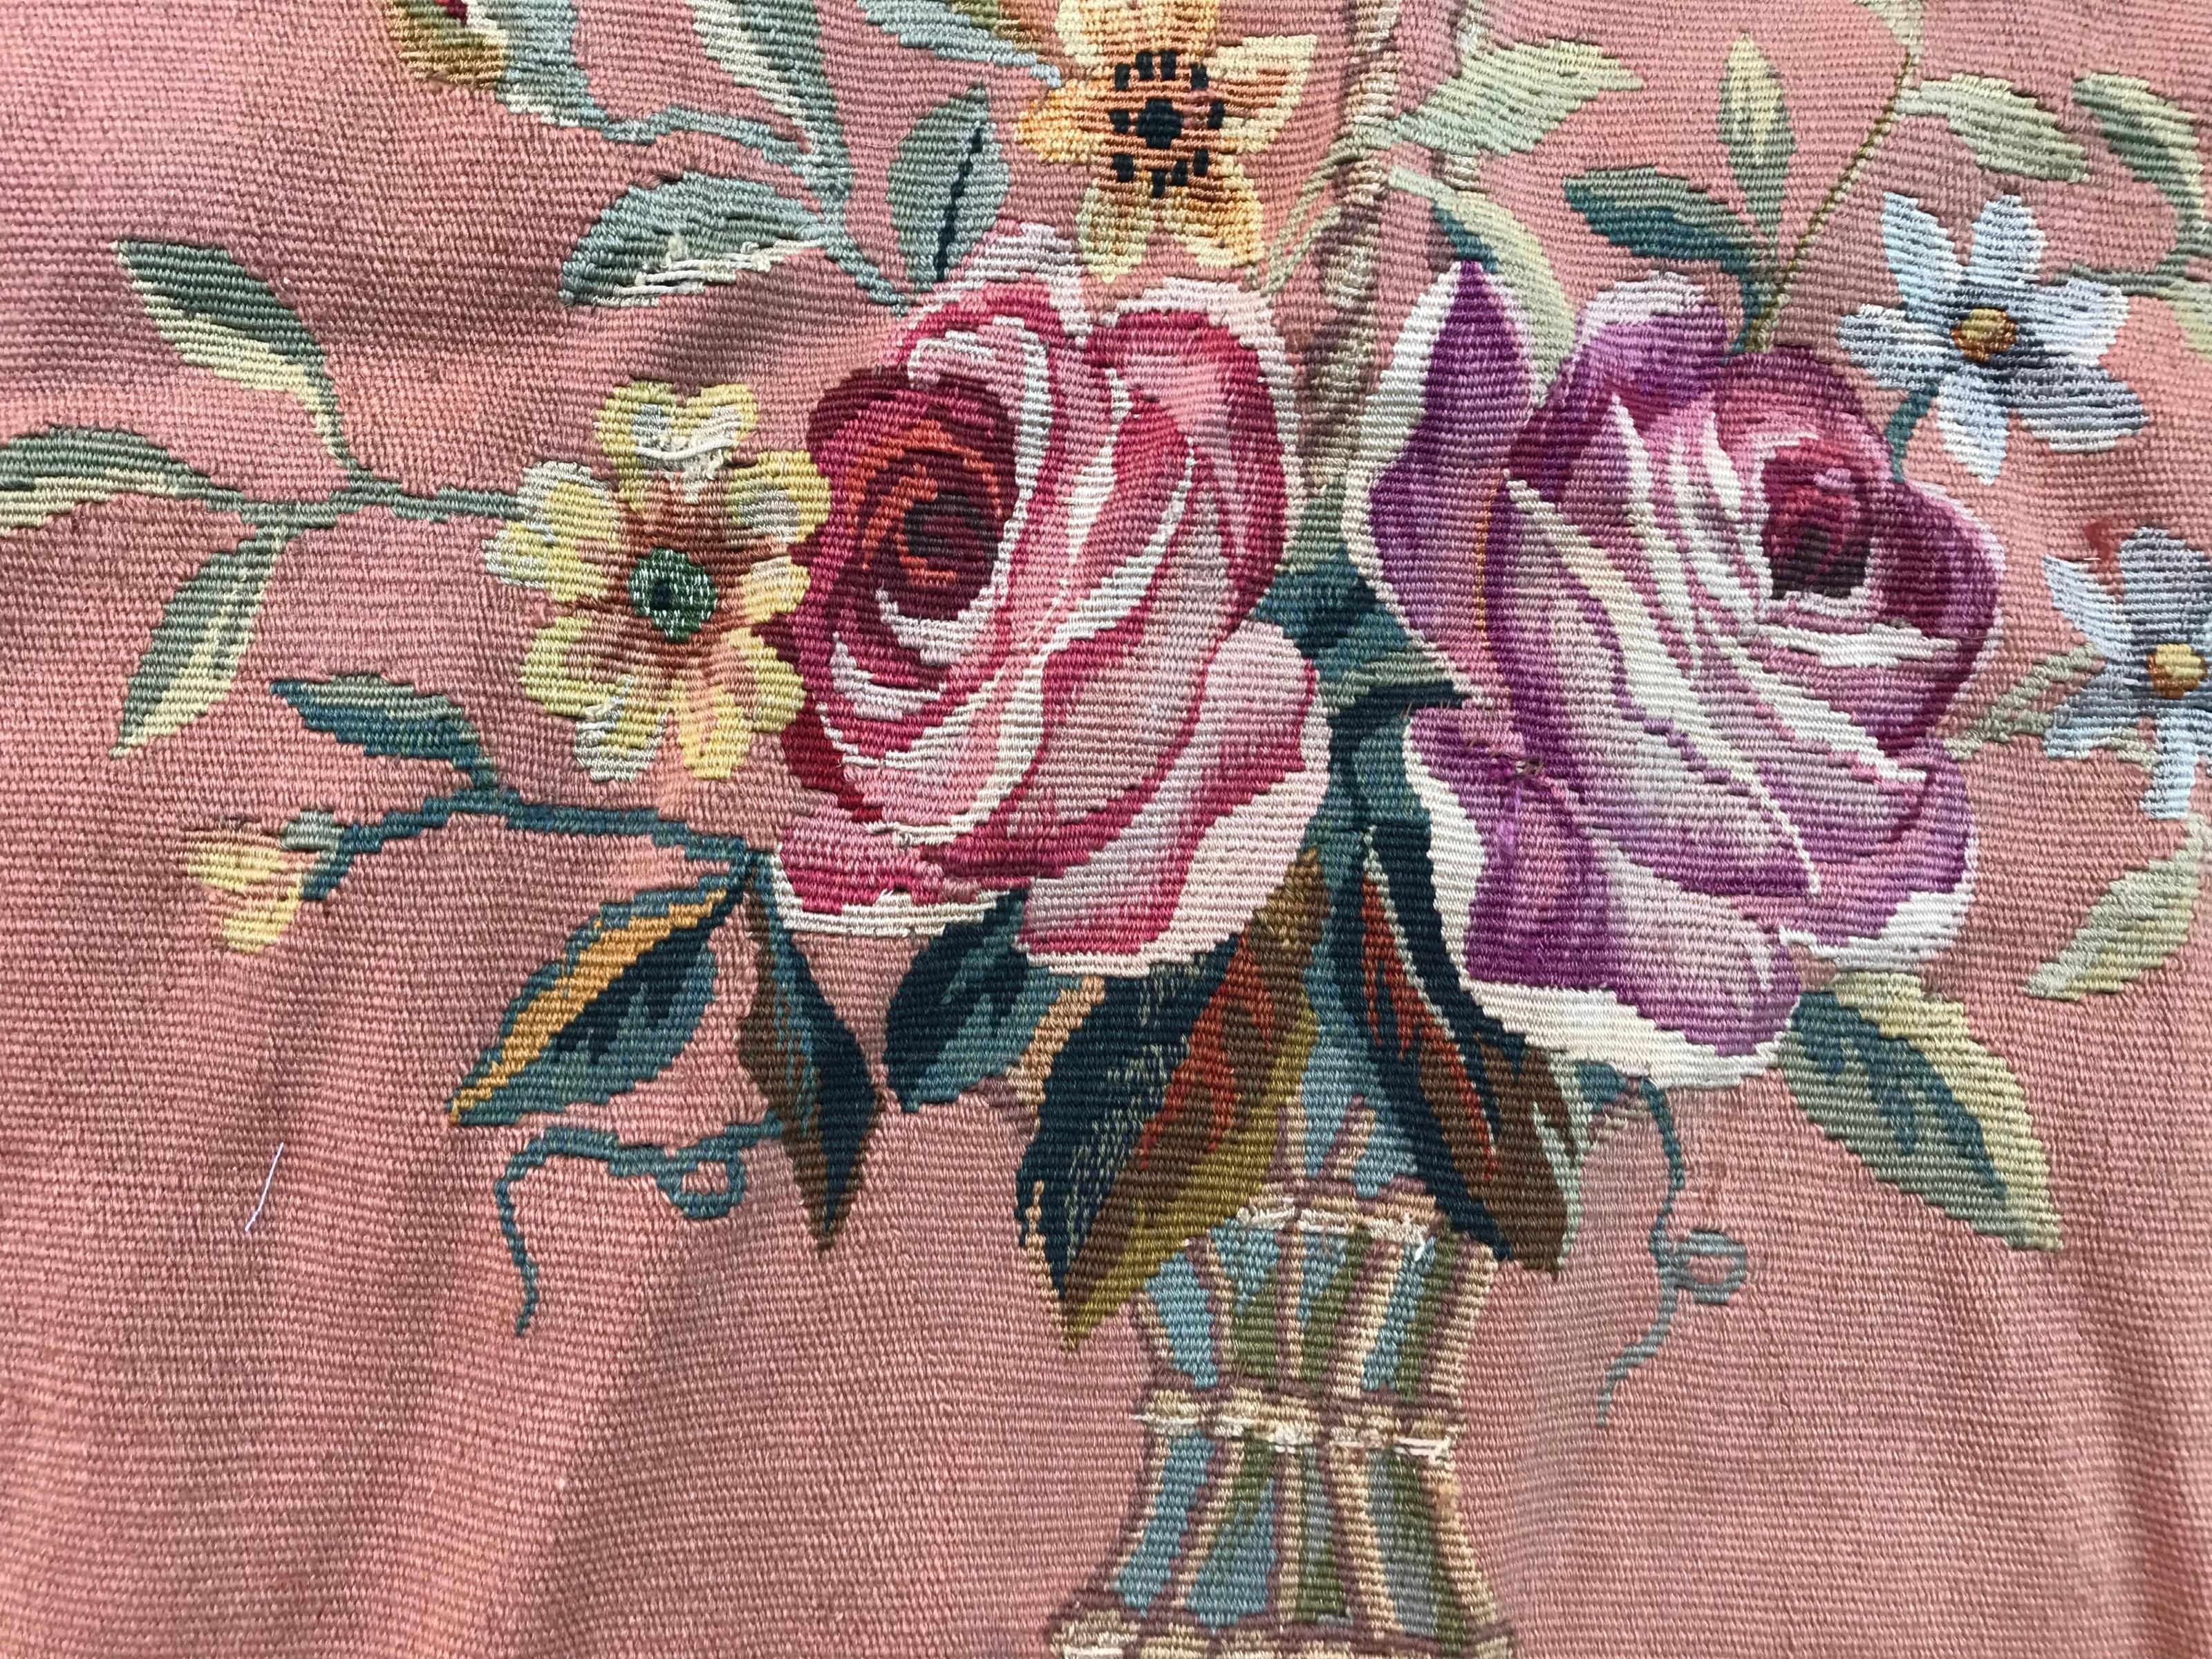 Exquisite late 19th-century Aubusson tapestry/rug from the Napoleon III period. Featuring a stunning floral design in vibrant colors, including a pink-orange field, and accents of pink, green, blue, and yellow. Meticulously handwoven with a blend of